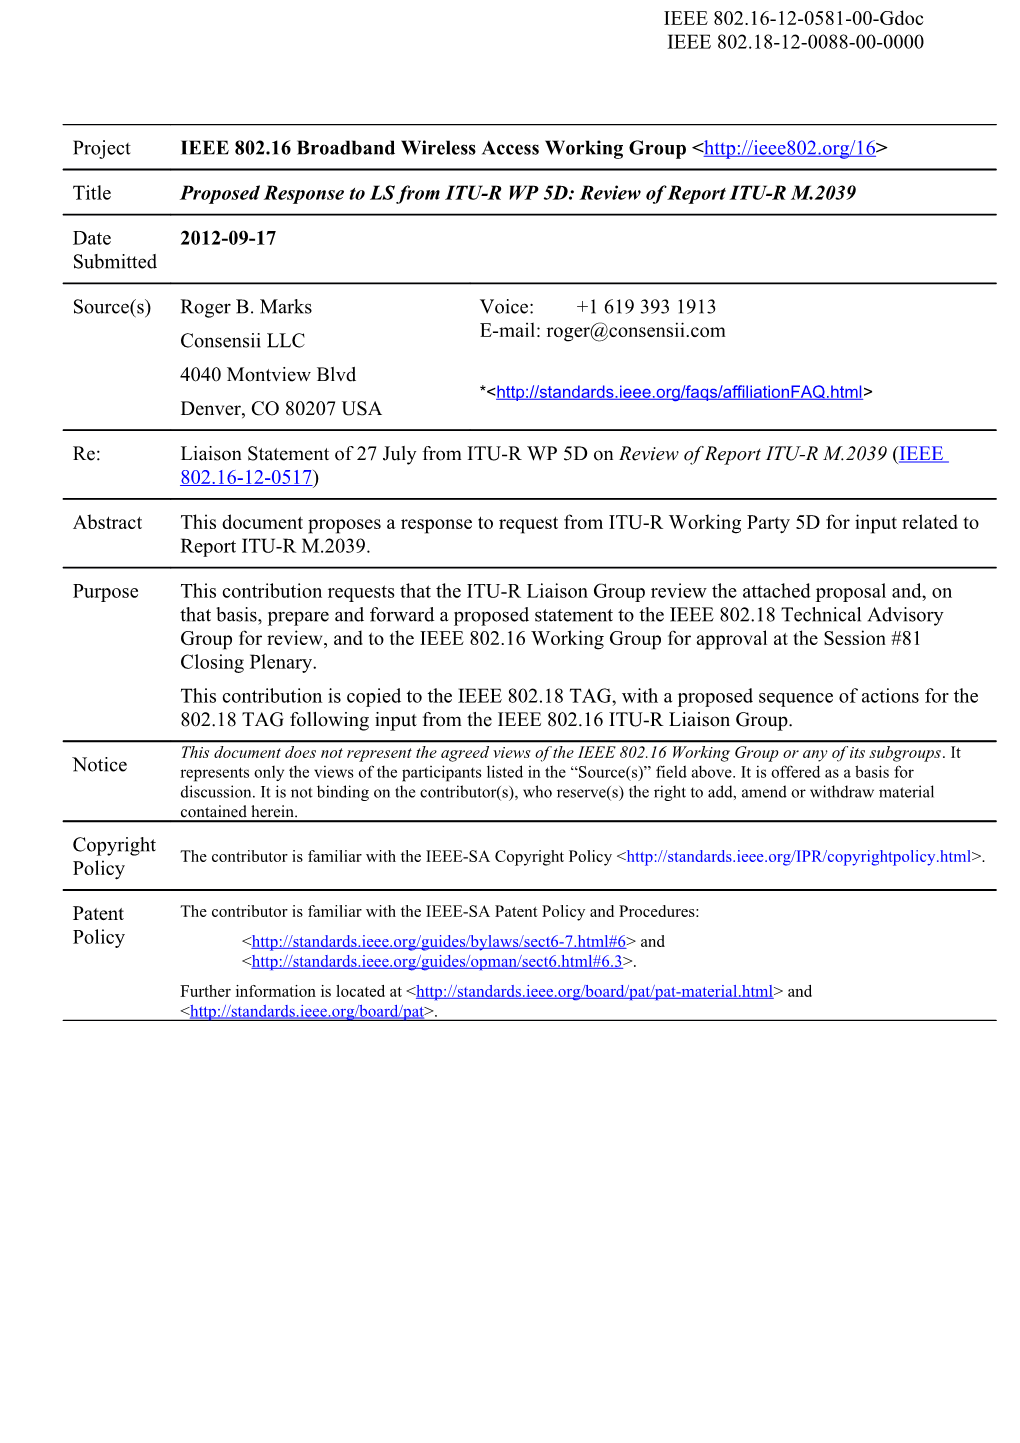 Proposed Response to LS from ITU-R WP 5D